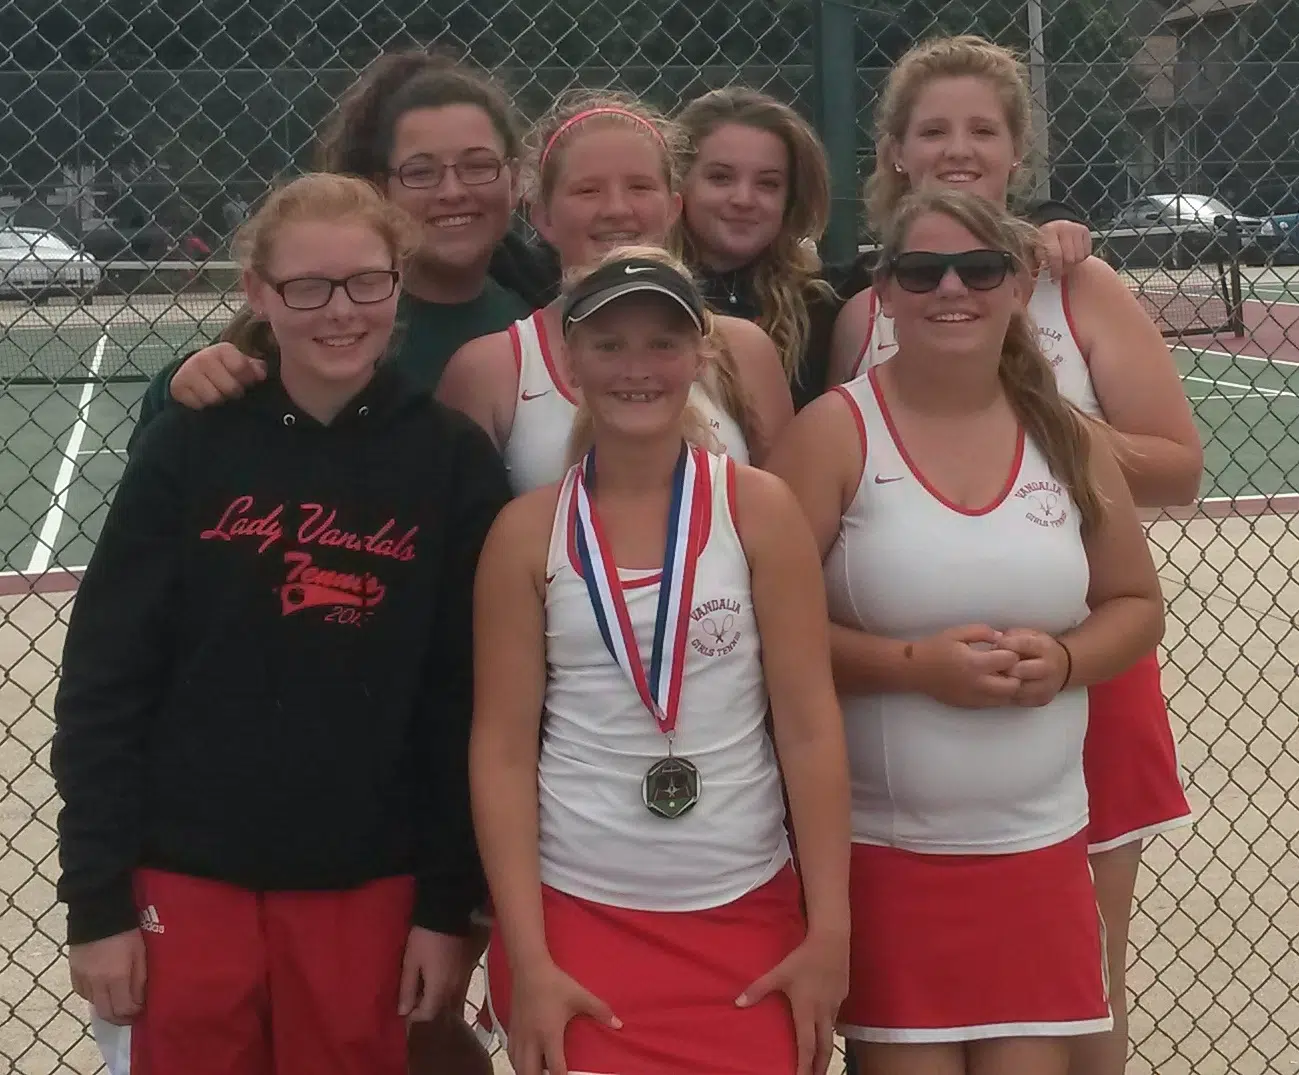 Hannah Blythe wins singles competition at Centralia Tournament 